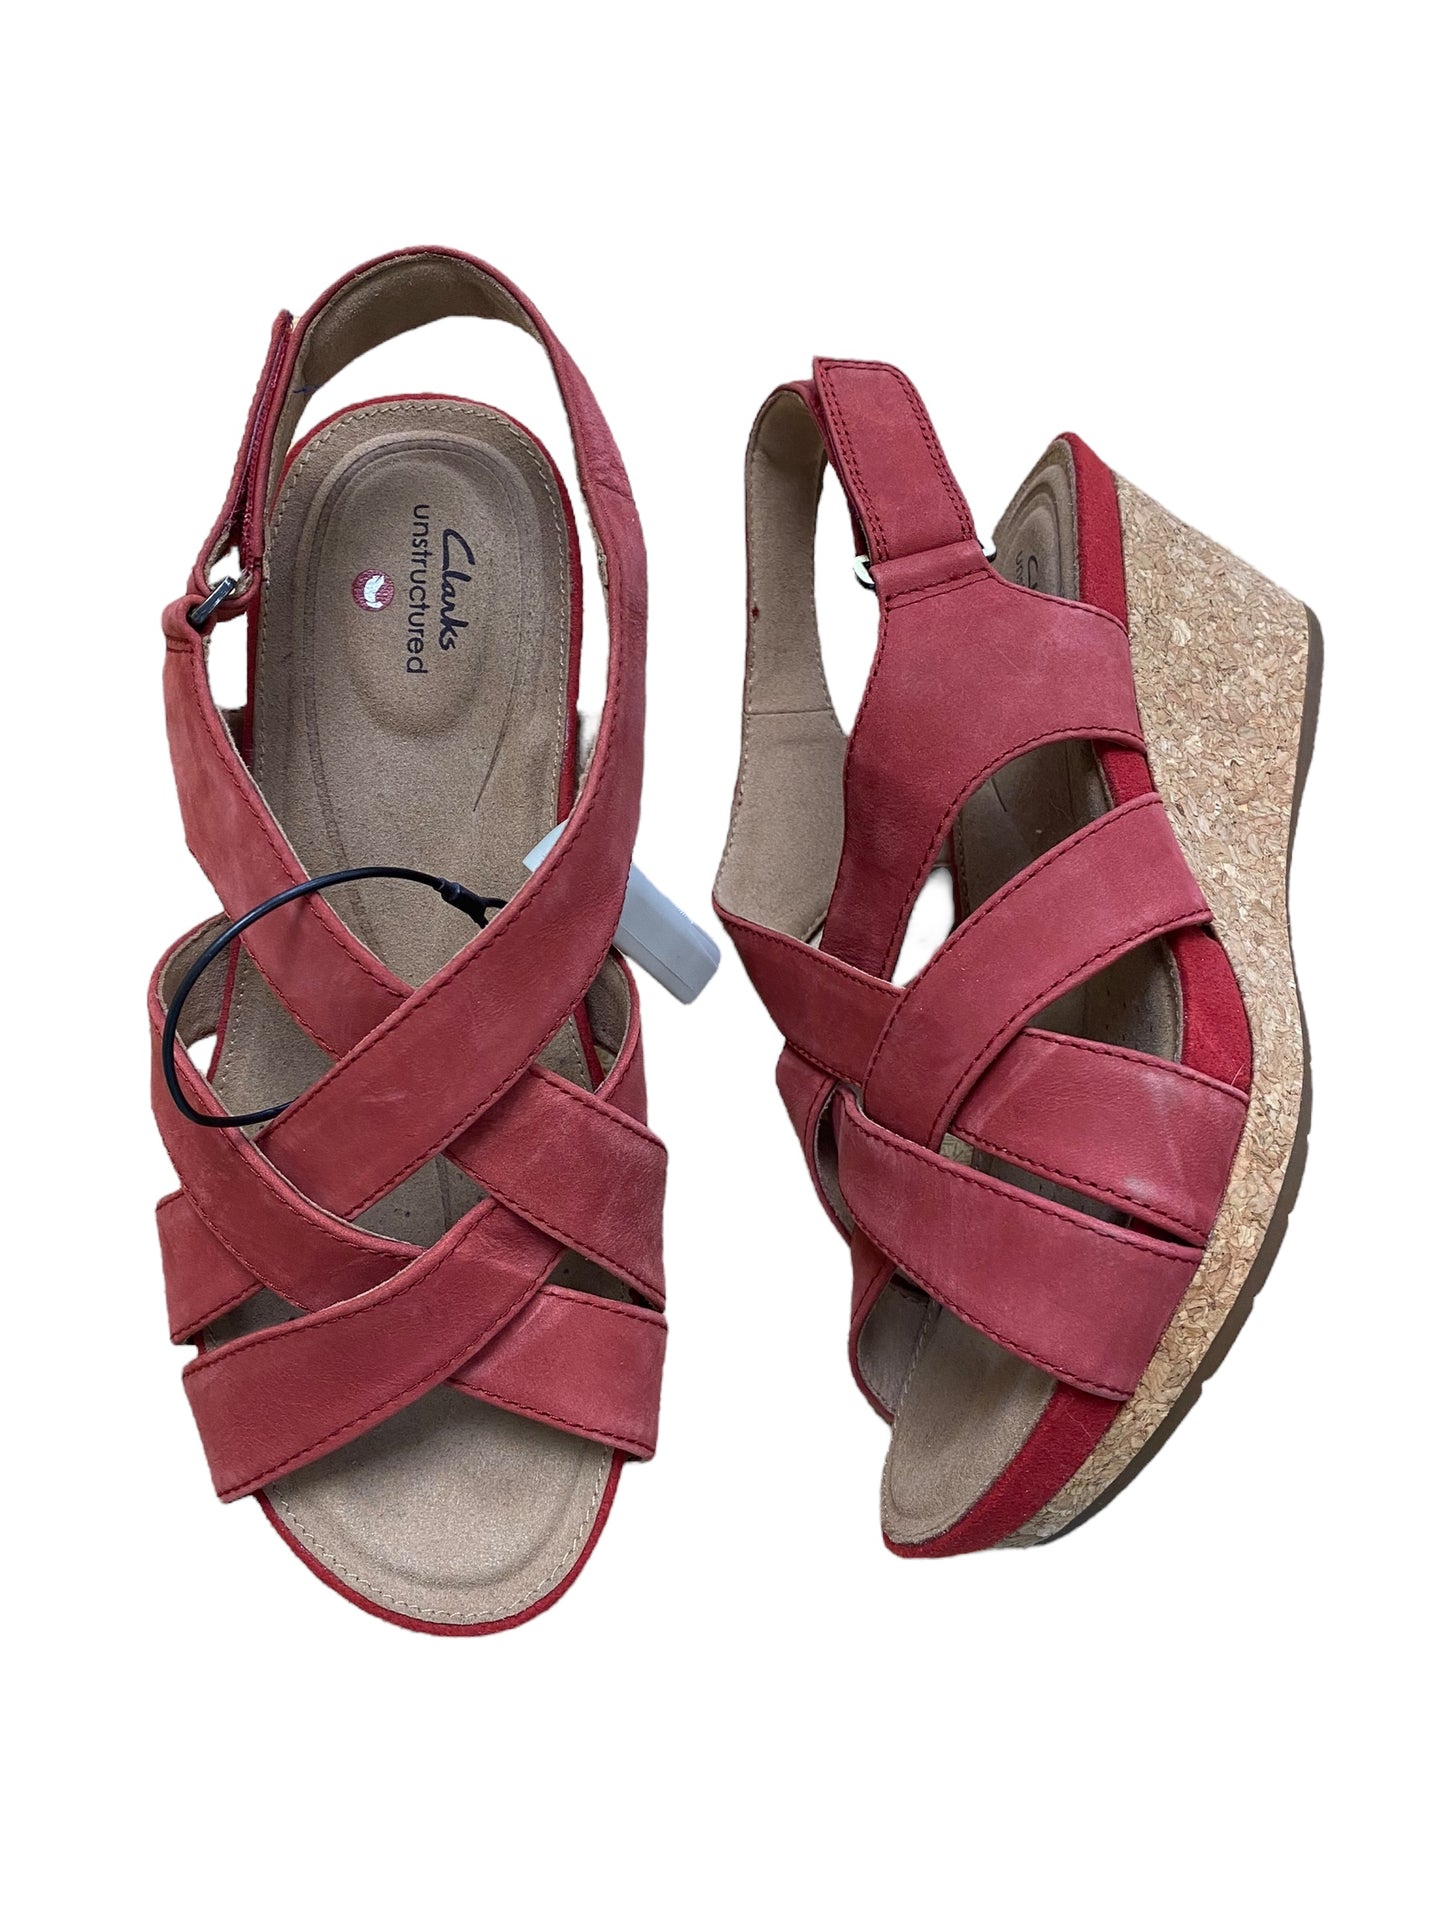 Sandals Heels Wedge By Clarks  Size: 7